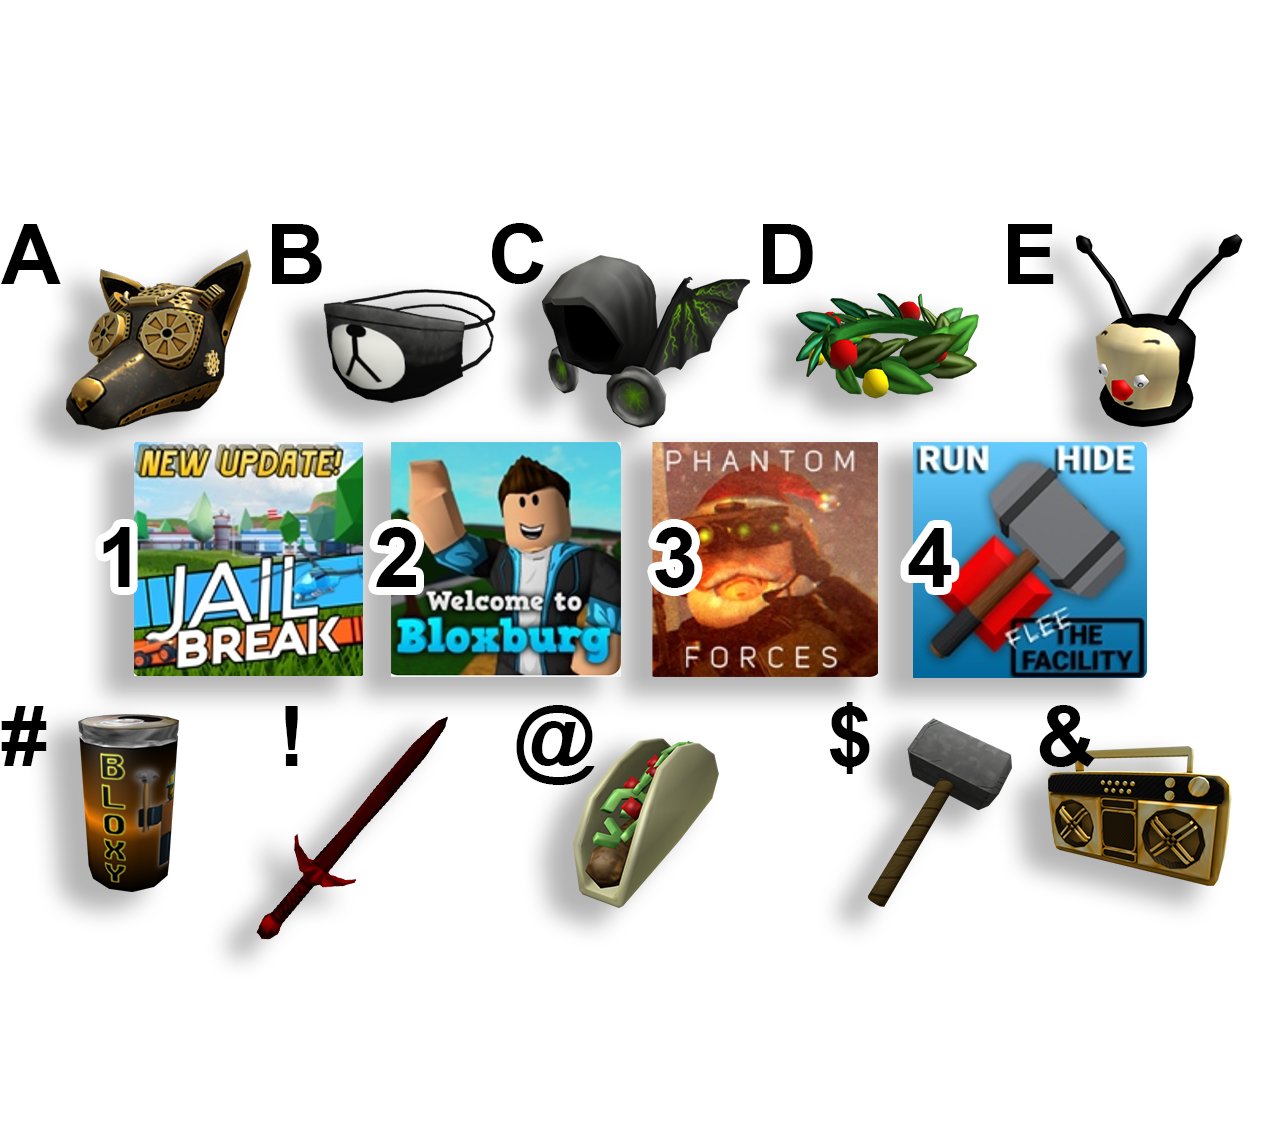 Roblox On Twitter Which Combo Are You Picking For The Ultimate Roblox Experience - roblox on twitter weve heard your suggestions improved